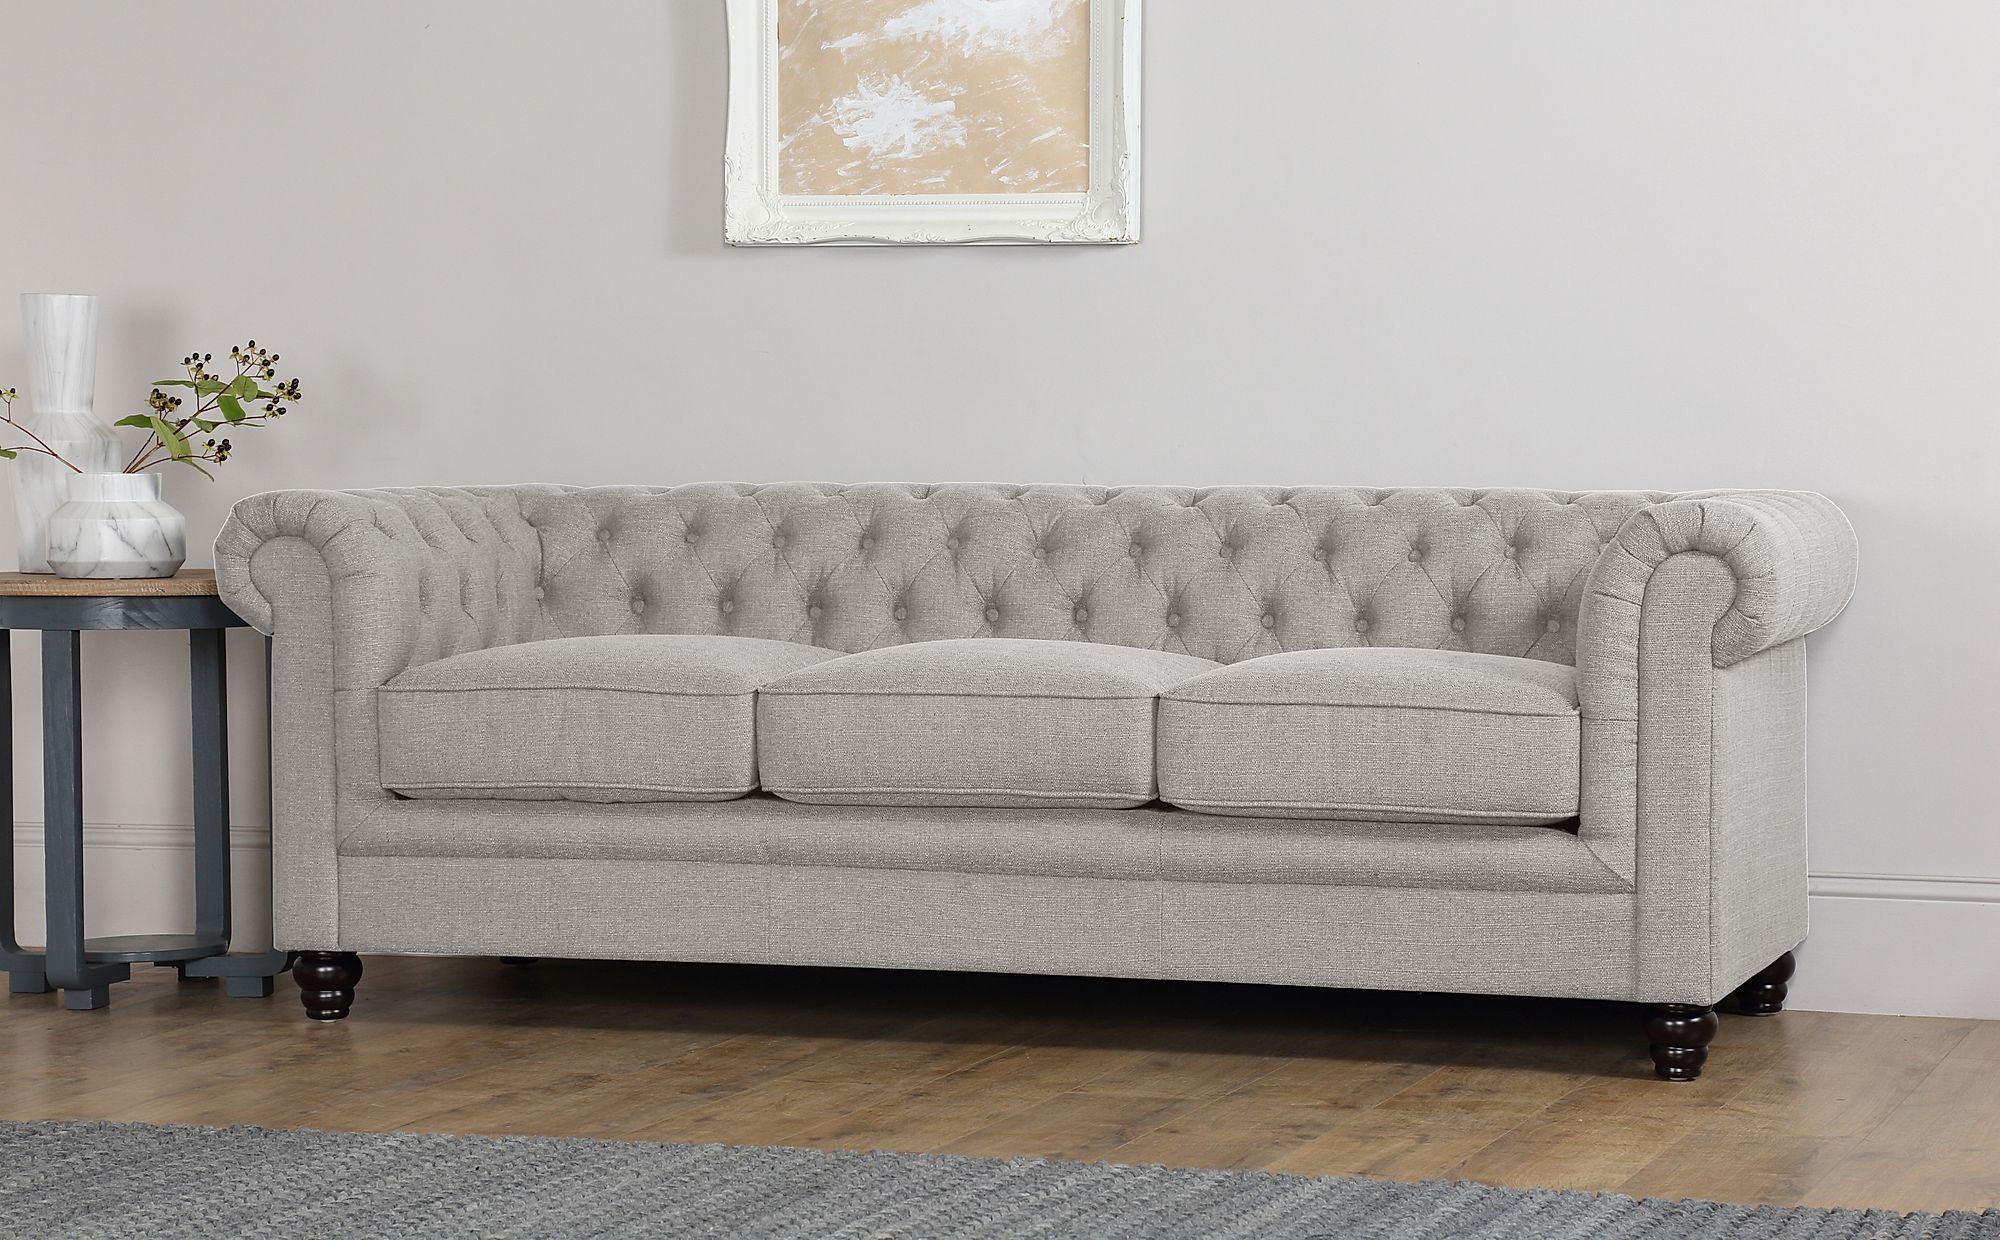 Hampton Light Grey Fabric 3 Seater Chesterfield Sofa | Furniture Choice Inside Sofas In Light Grey (View 15 of 20)